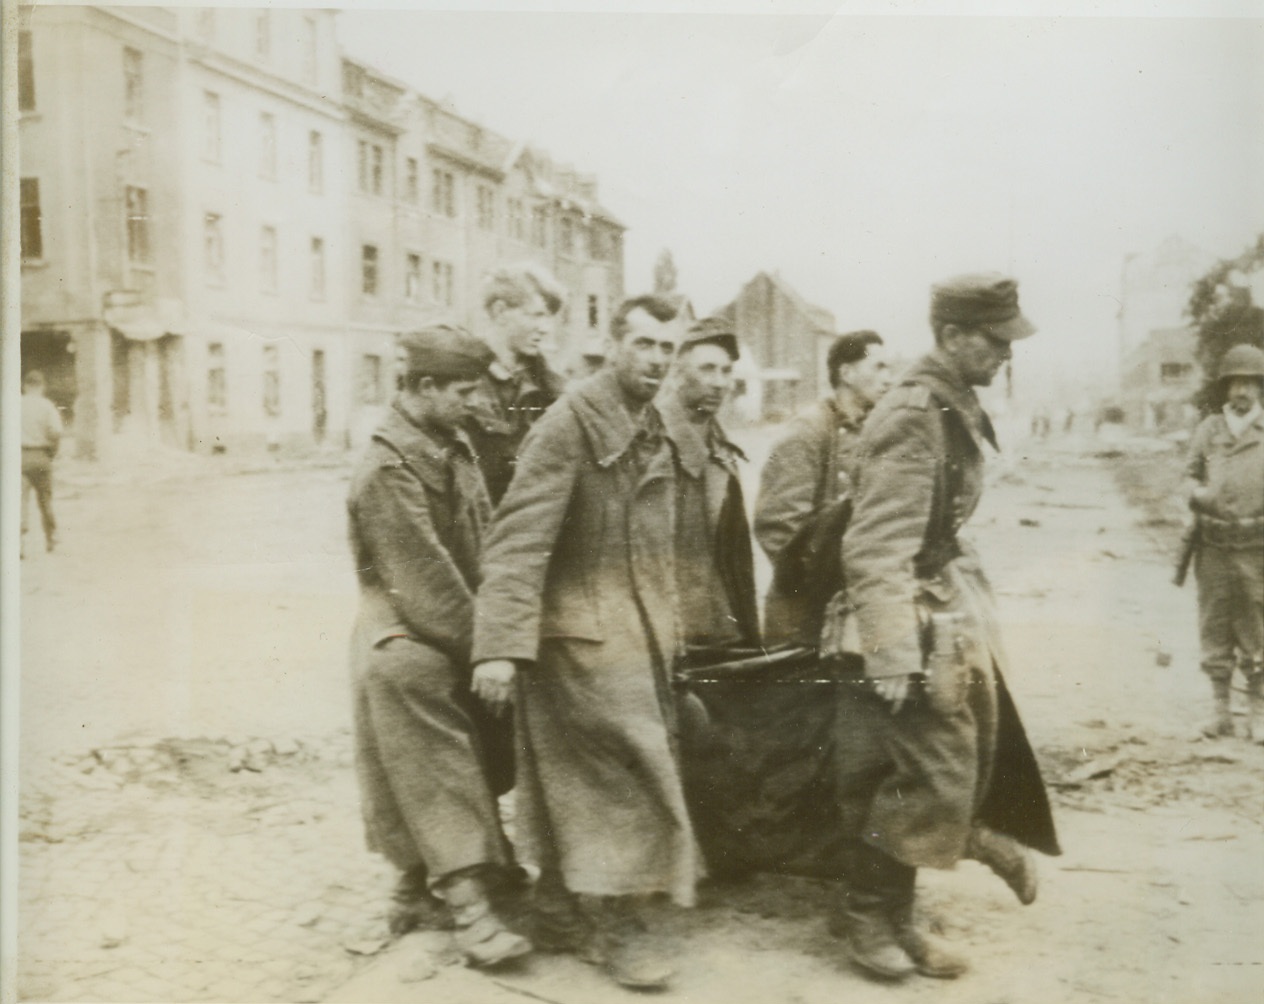 Aachen Prisoners Remove Own Wounded, 10/14/1944. GERMANY – Haggard and worn, this group of Nazi prisoners, taken during the battle for Aachen, uses a tent to remove a wounded comrade to an aid station. An American soldier stands aside watching the captured Germans. Credit (Army Radiotelephoto from ACME);